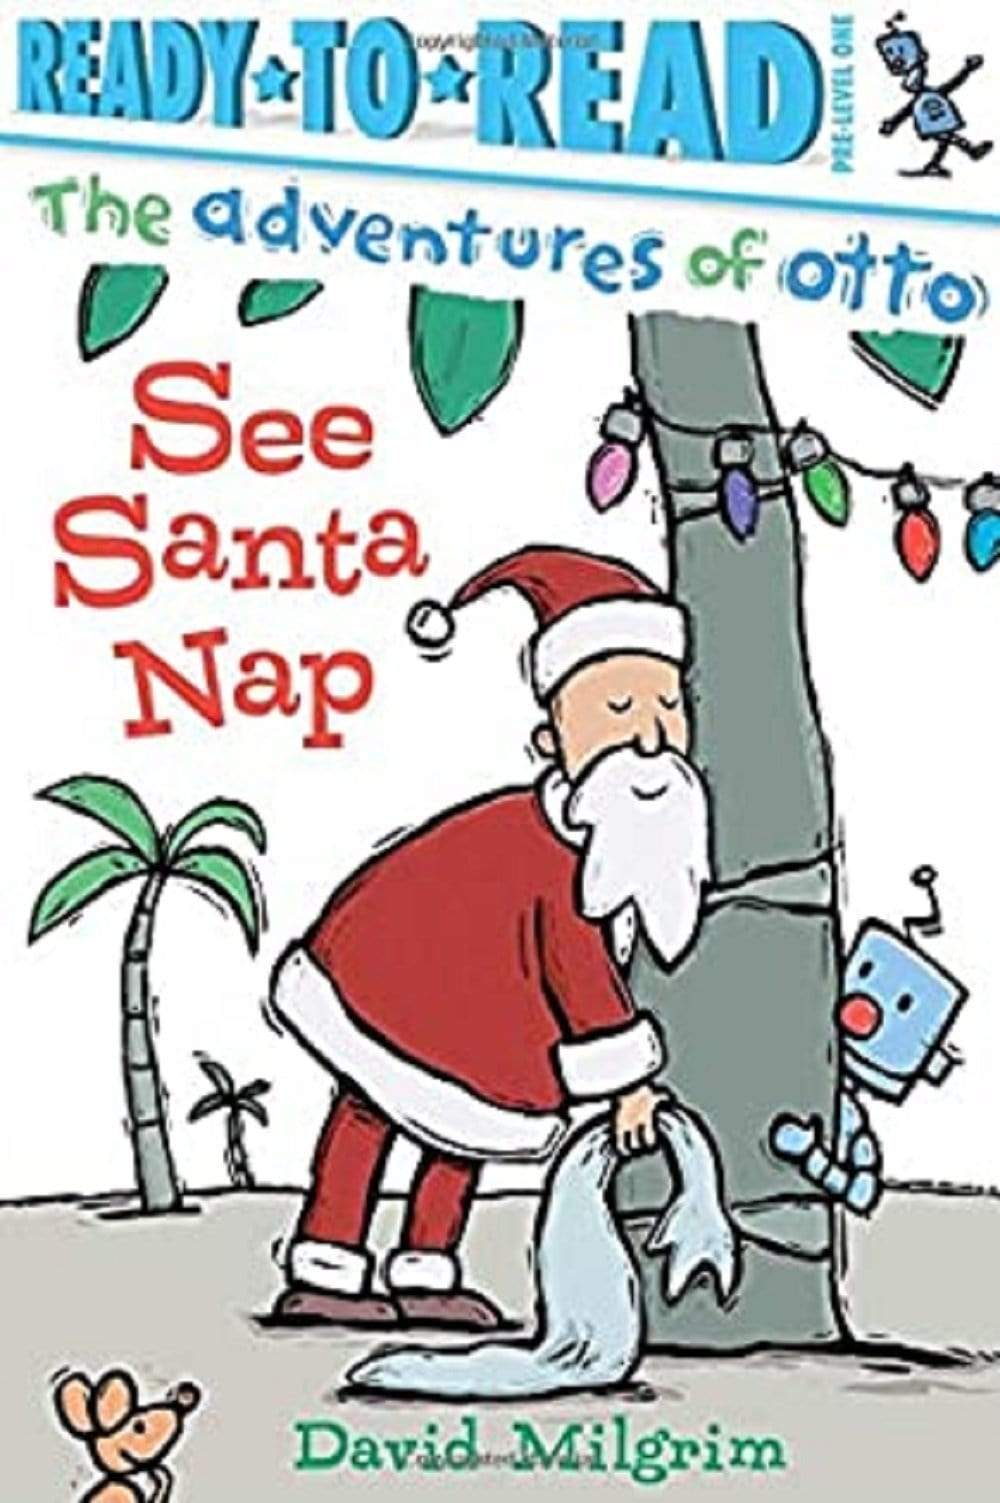 THE ADVENTURES OF OTTO " SEE SANTA SNAP"